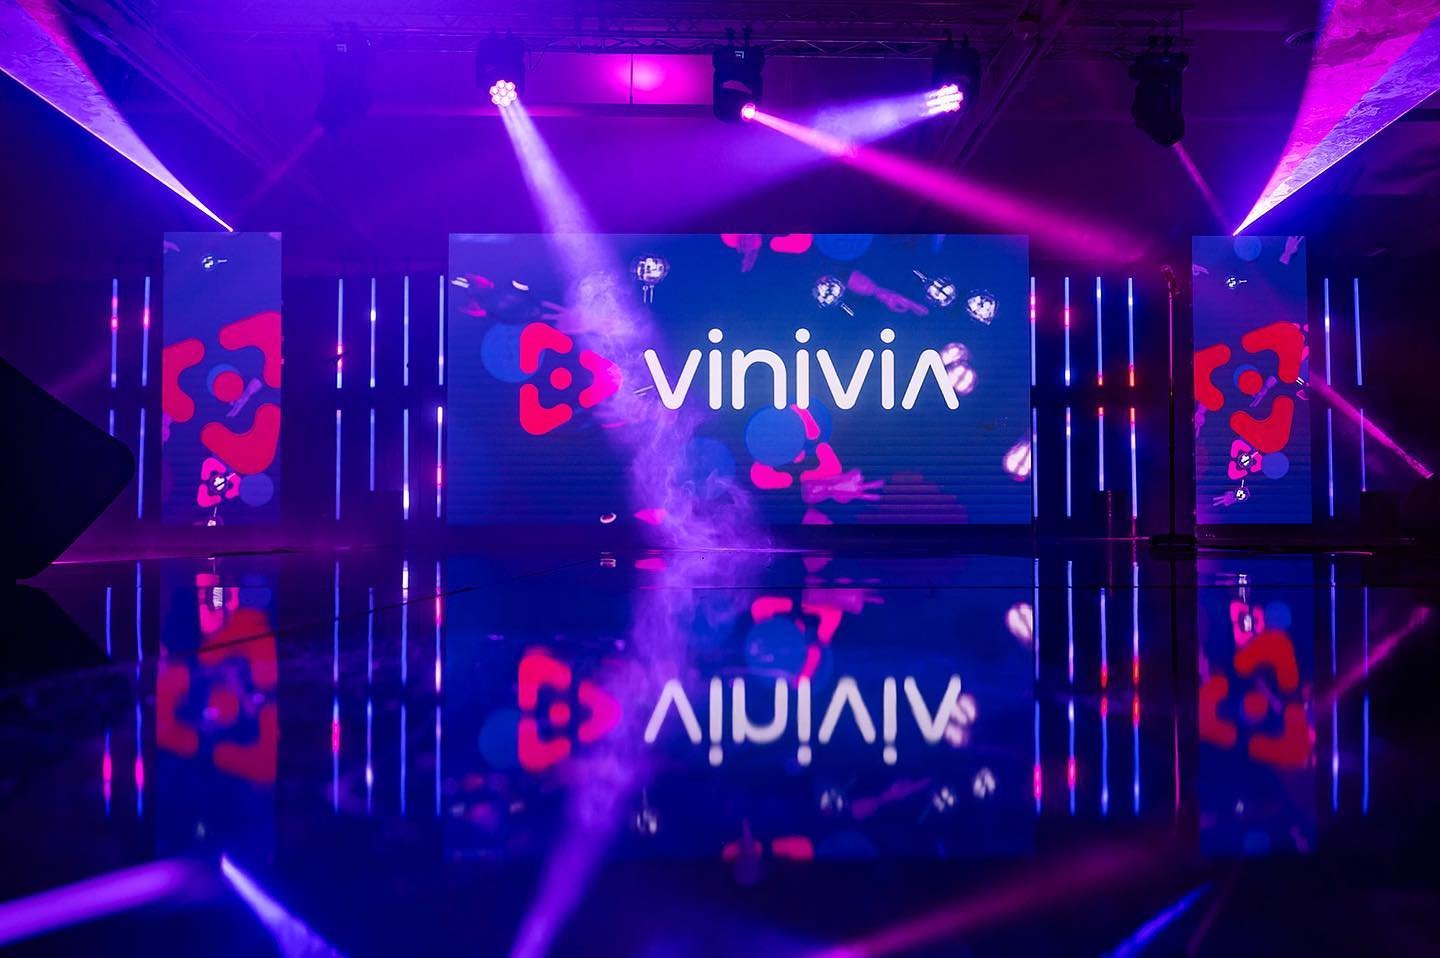 You earn your trophies at practice, you just pick them up at competitions. 

Practice makes perfect with our dream team.

#thewotp #wifeoftheparty #eventproduction #eventrentals #eventdesign #staging #teamwork #vinivia #led